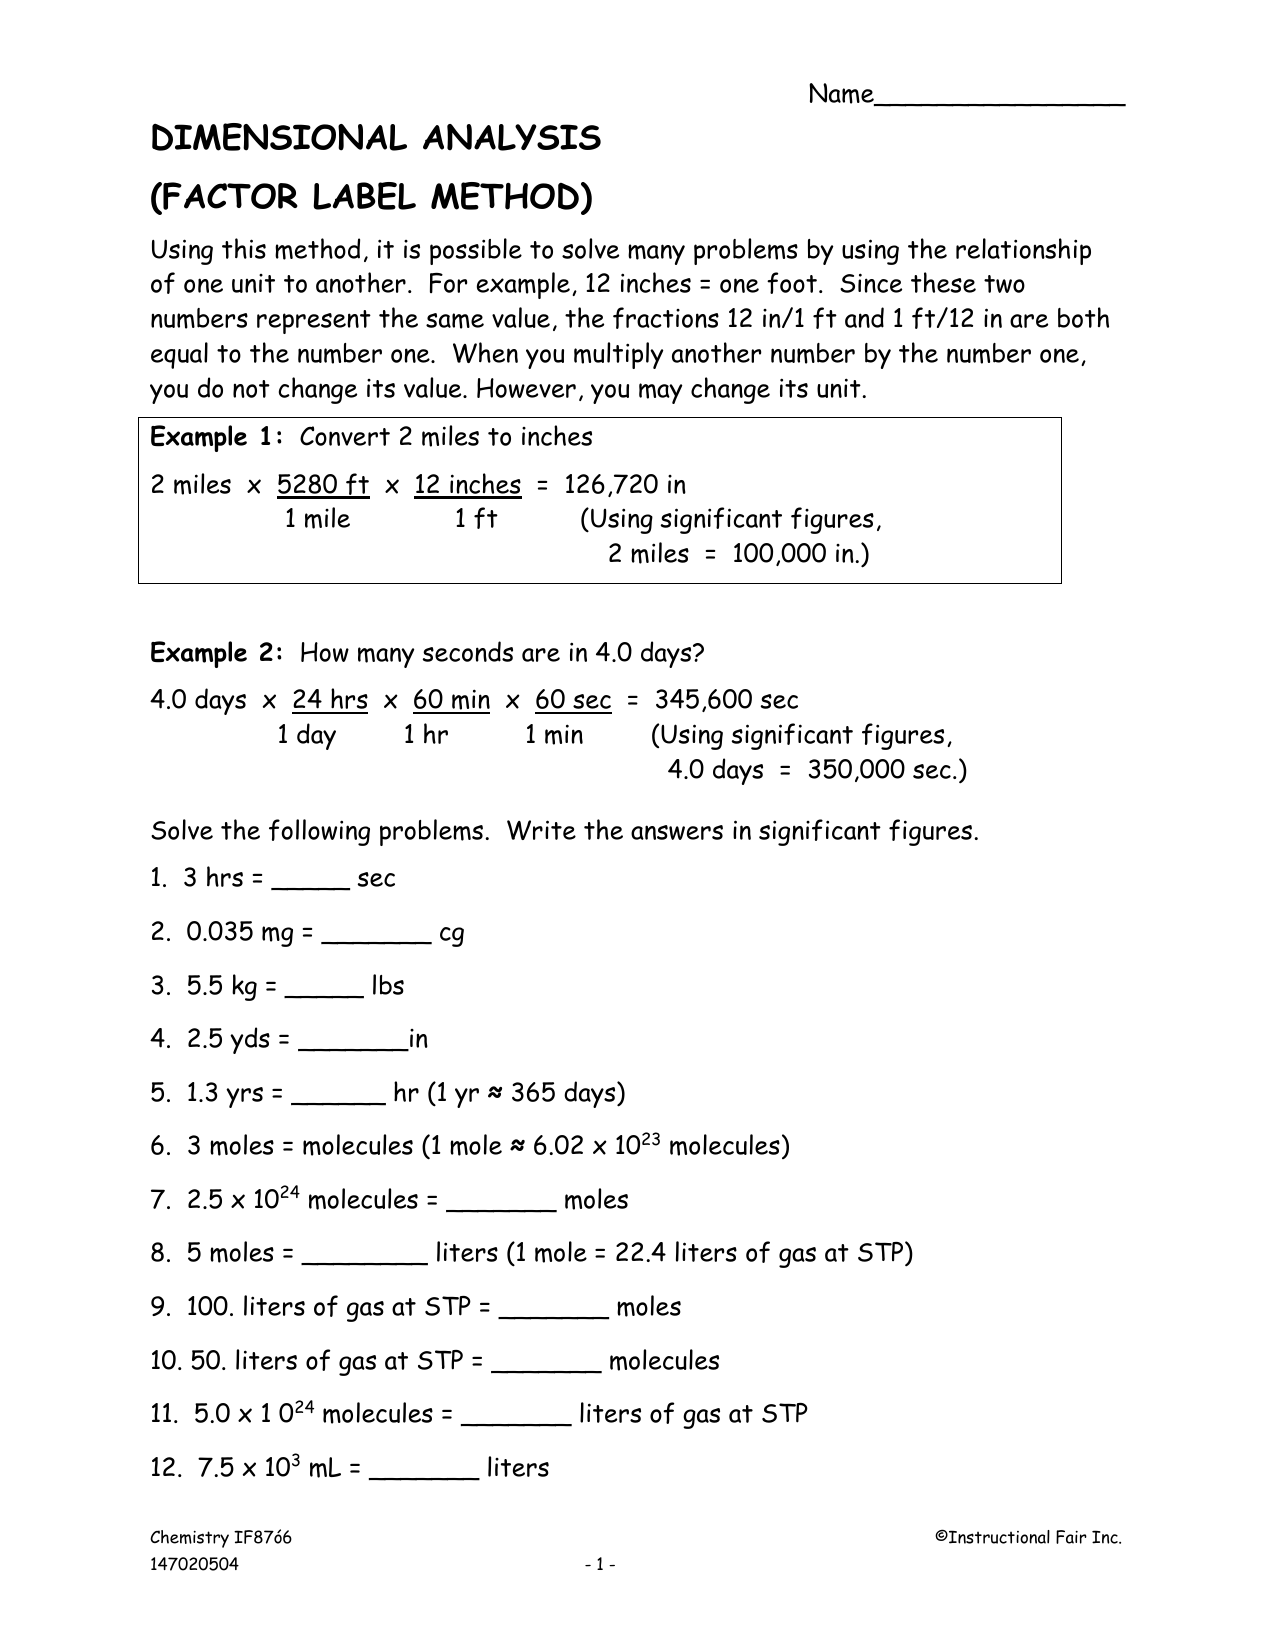 dimensional analysis - Dr. Vernon- Inside Dimensional Analysis Worksheet Answers Chemistry